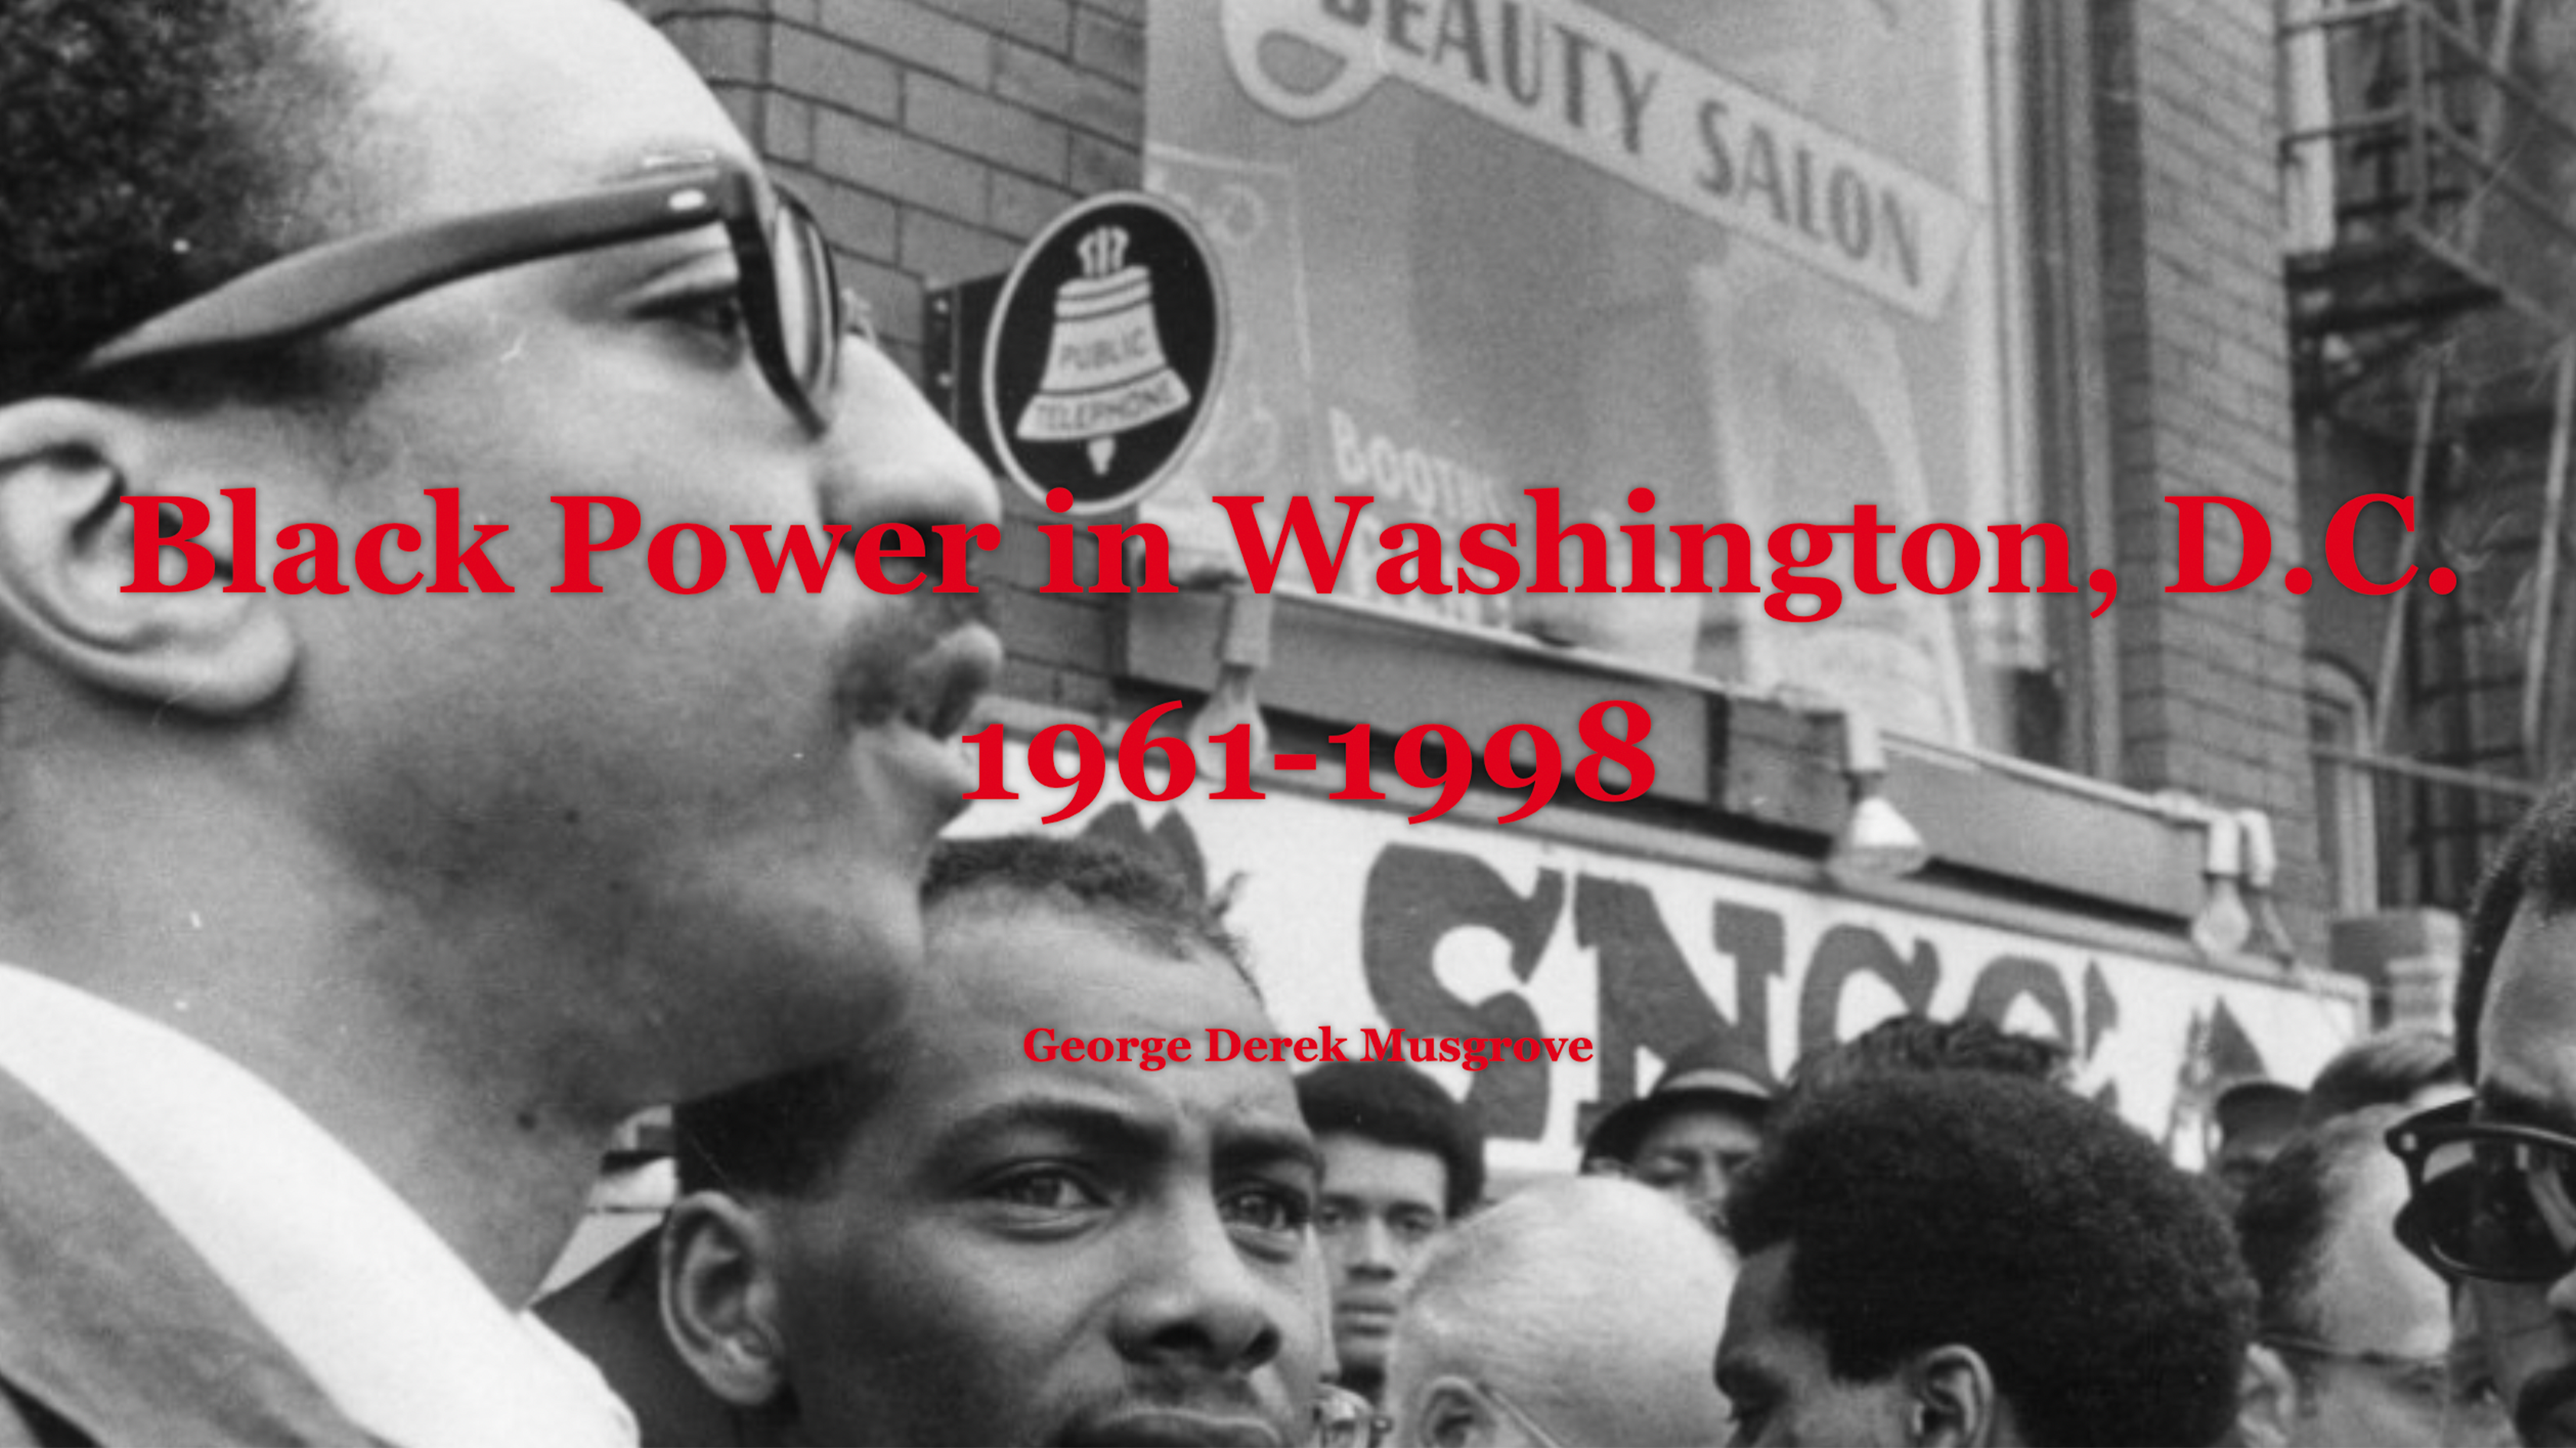 Red text is overlaid over a black and white image of the top of a crowd in a street. Text reads Black Power in Washington D.C. 1961-1998